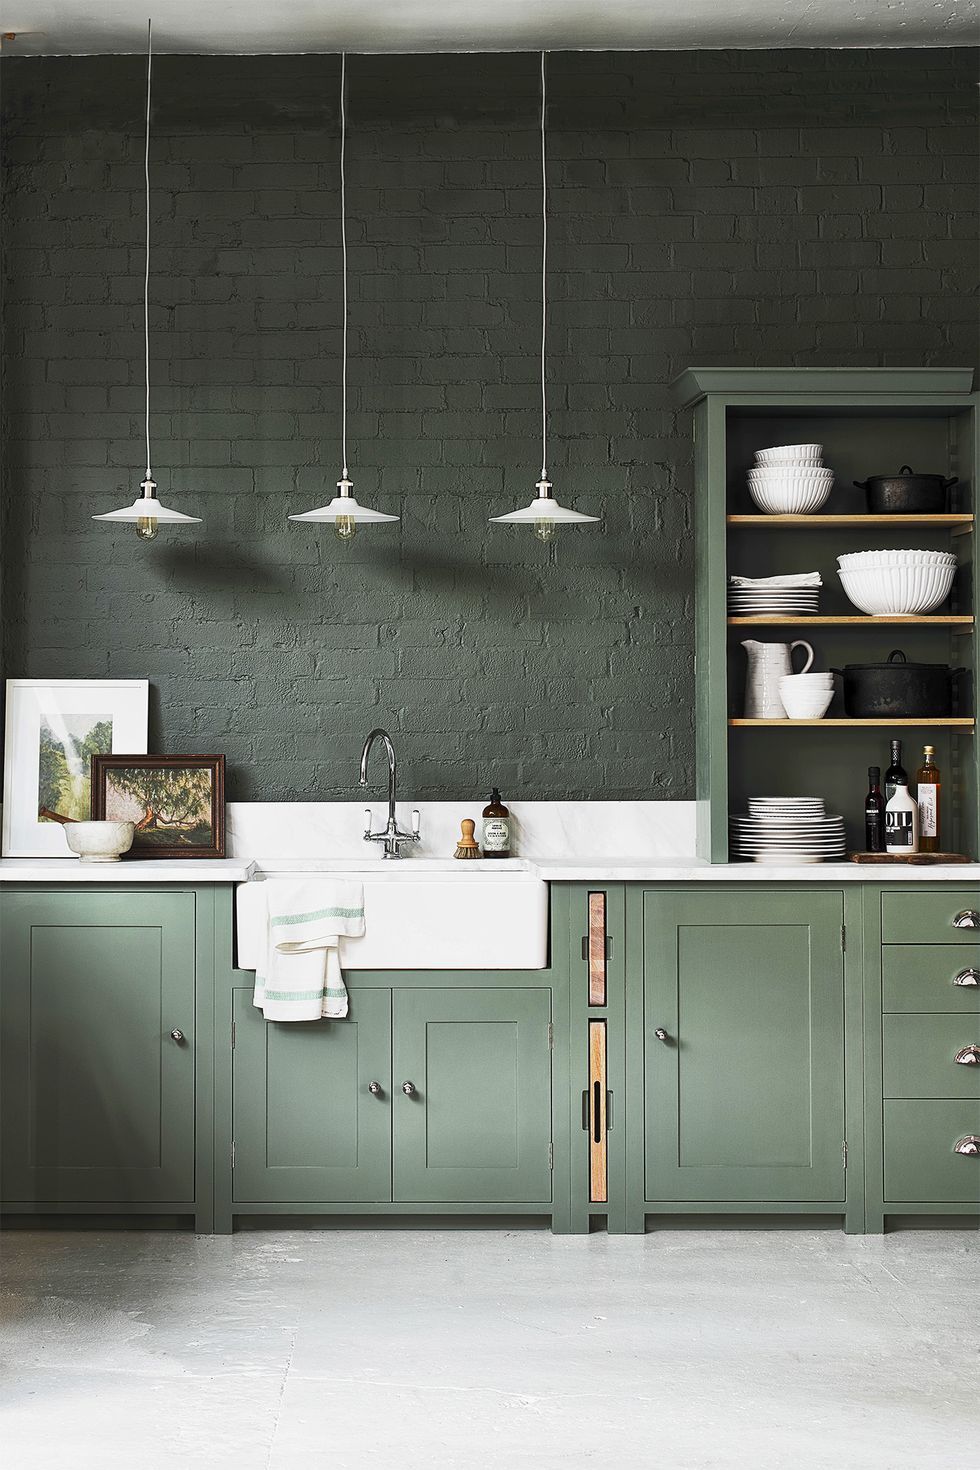 https://hips.hearstapps.com/hmg-prod/images/green-kitchen-cabinet-ideas-rustic-1642089103.jpeg?crop=1xw:1xh;center,top&resize=980:*